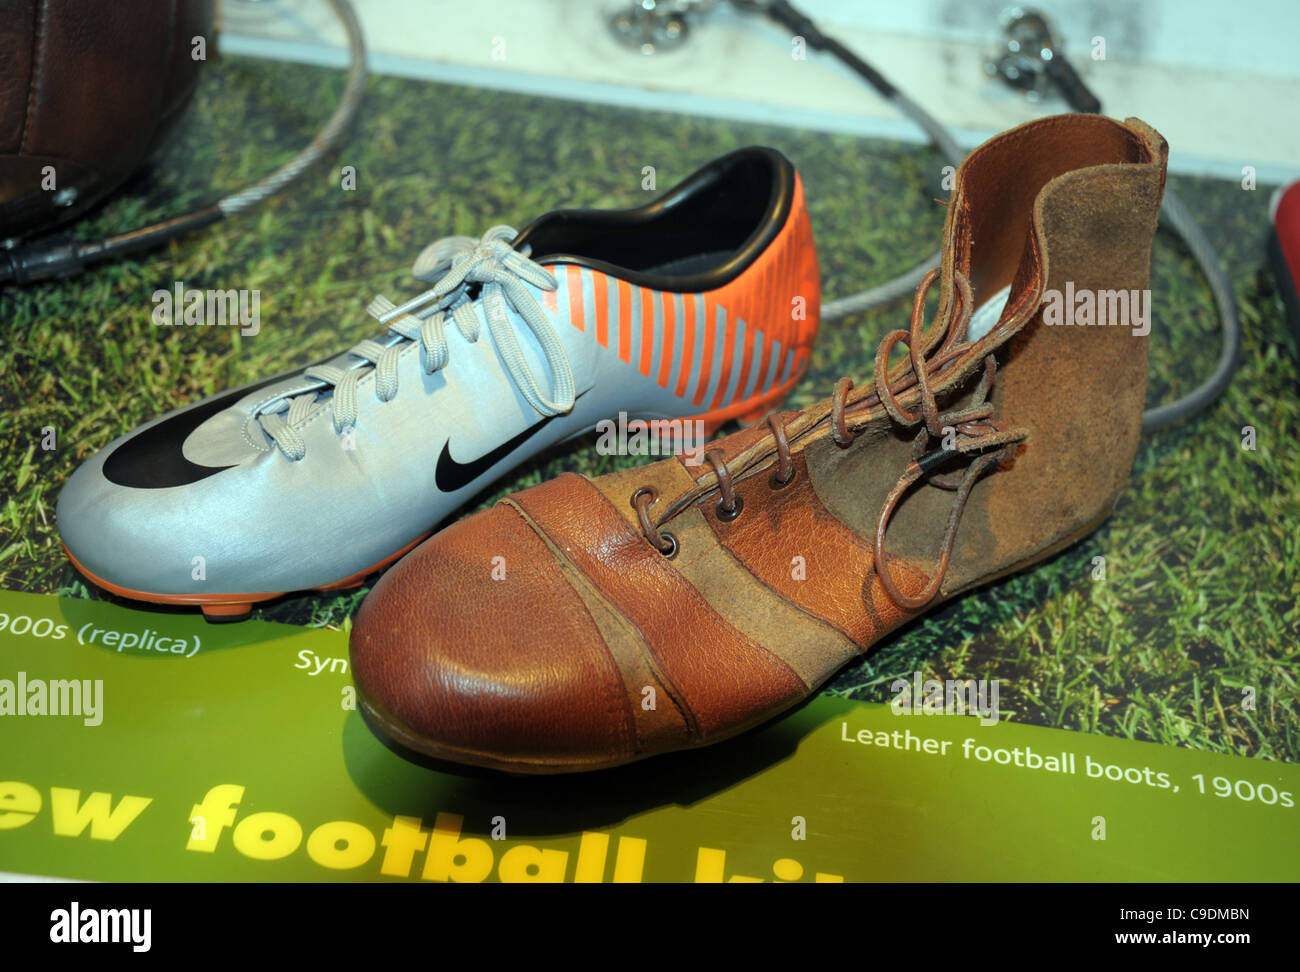 Old Football Boots Boot High Resolution Stock Photography and Images - Alamy